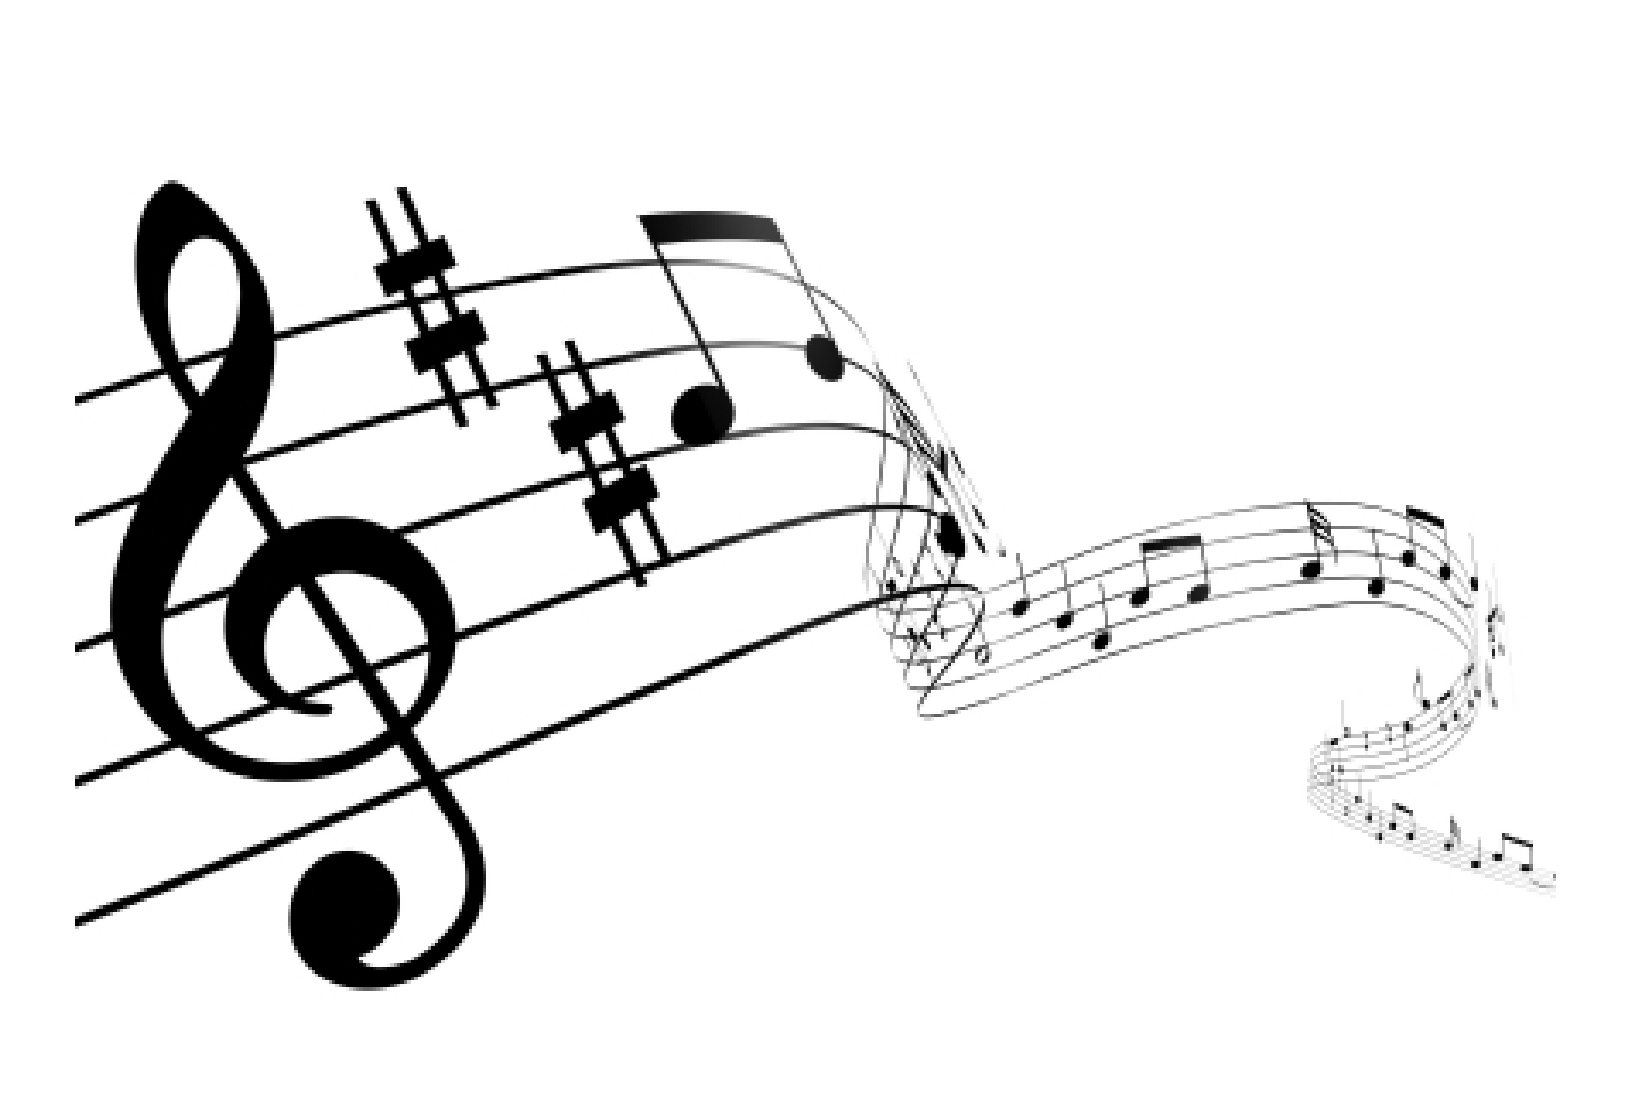 Png Hd Musical Notes Symbols - Music Notes Hd Widescreen 10 Hd Wallpapers | Lzamgs., Transparent background PNG HD thumbnail